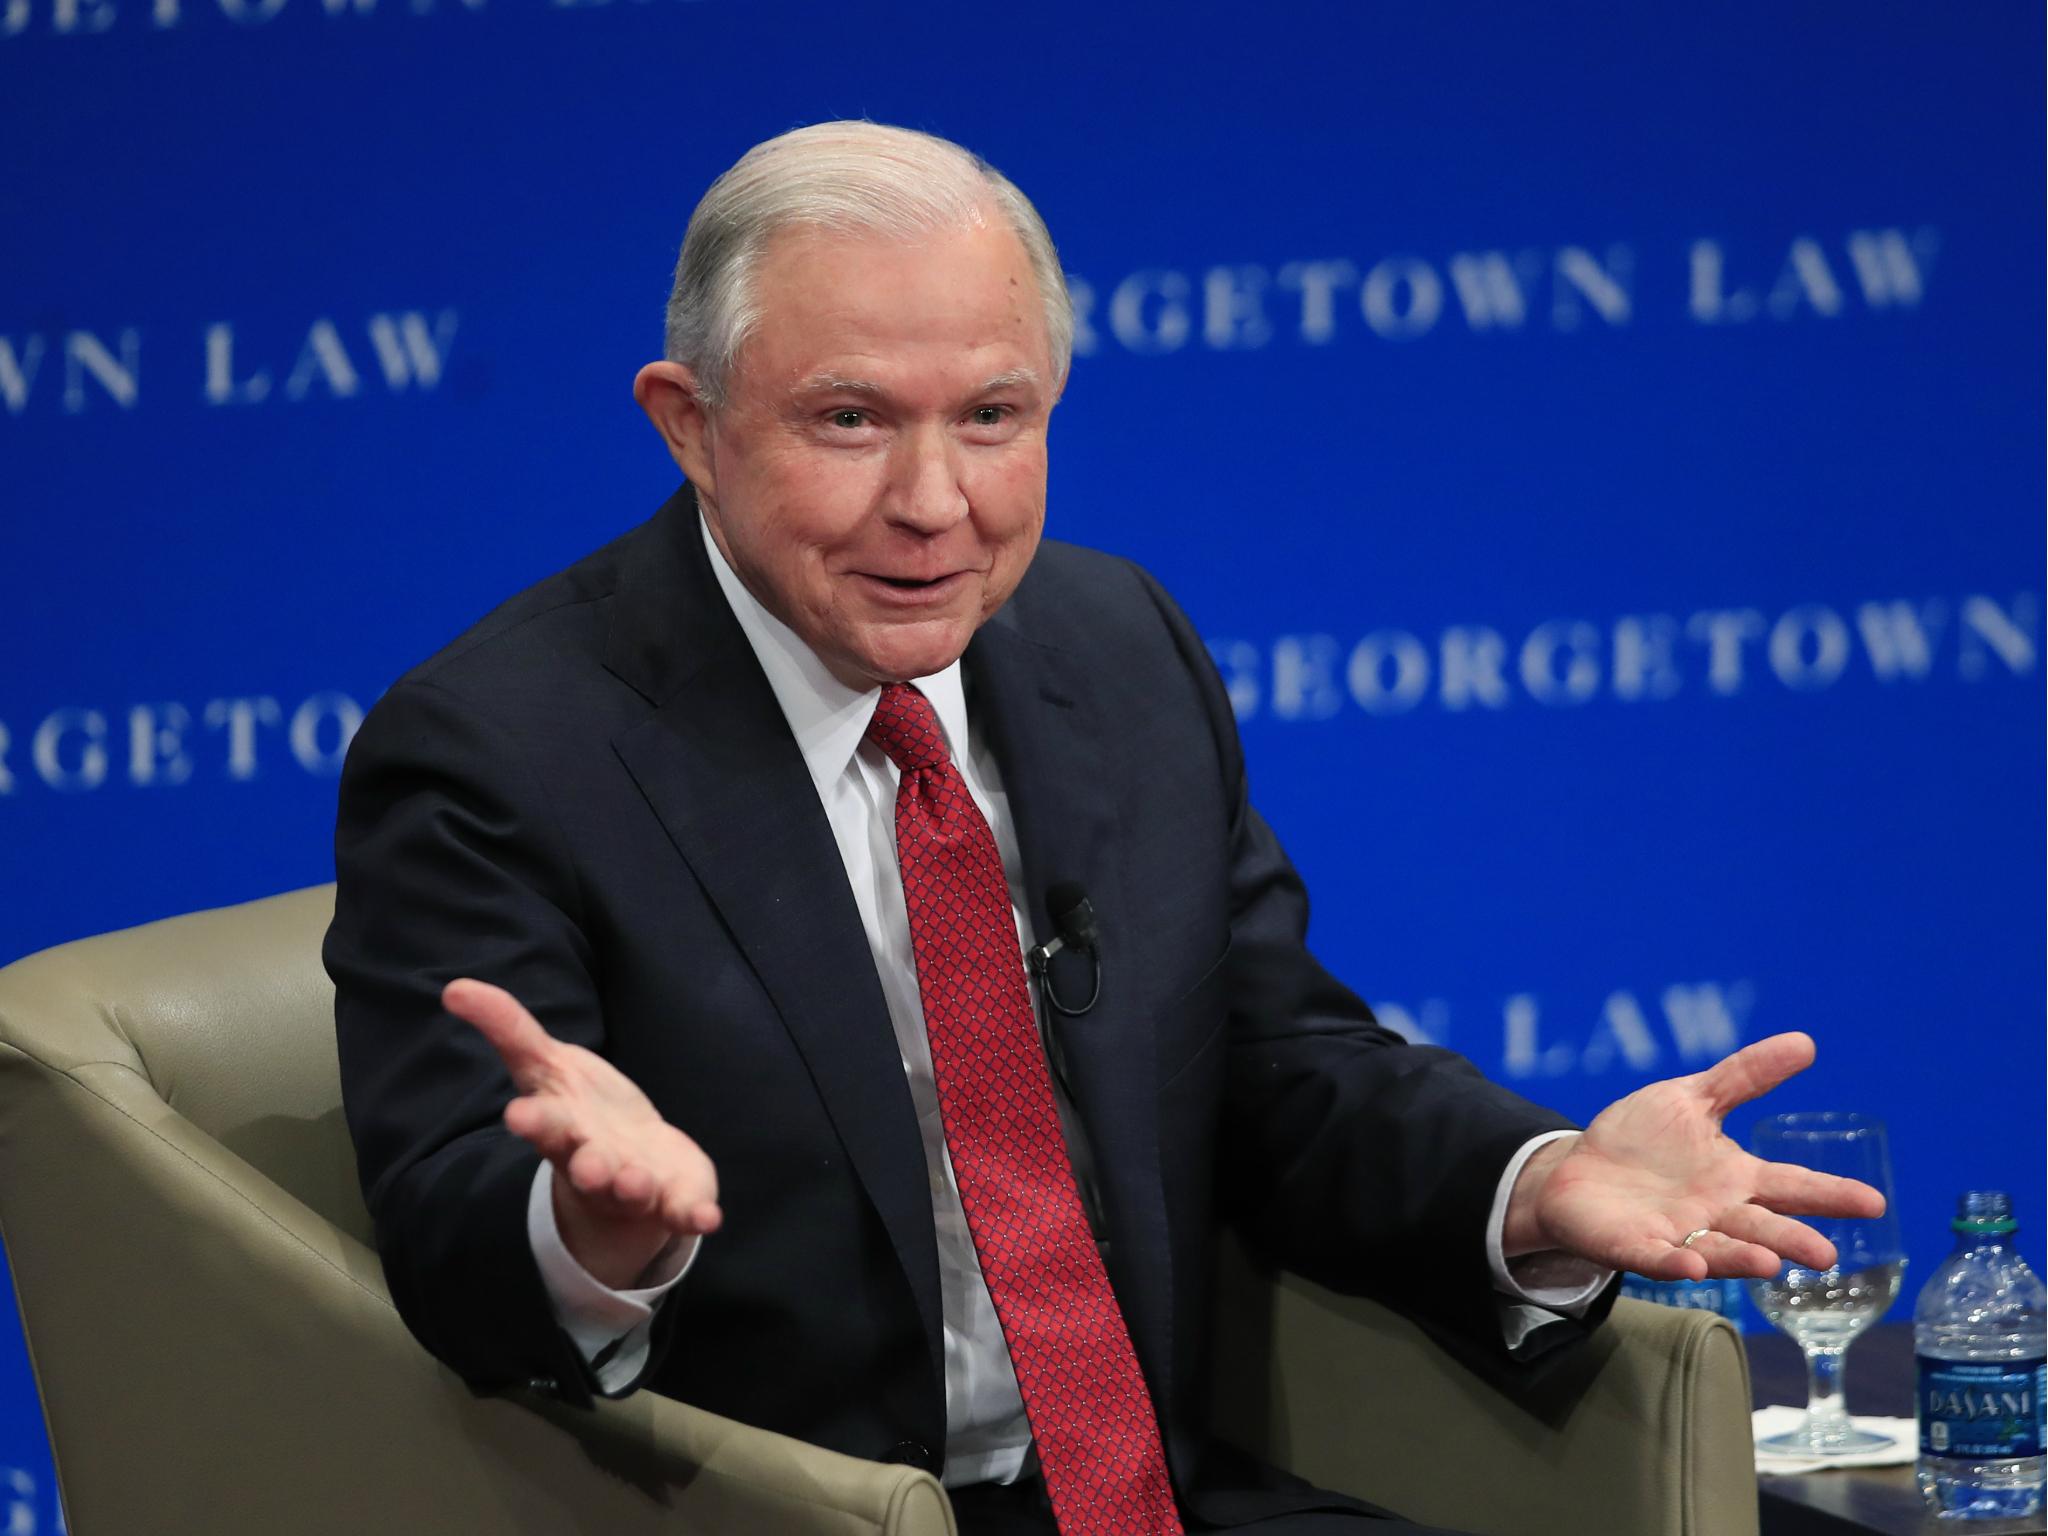 Attorney General Jeff Sessions speaks about free speech at the Georgetown University Law Center in Washington, DC on 26 September.